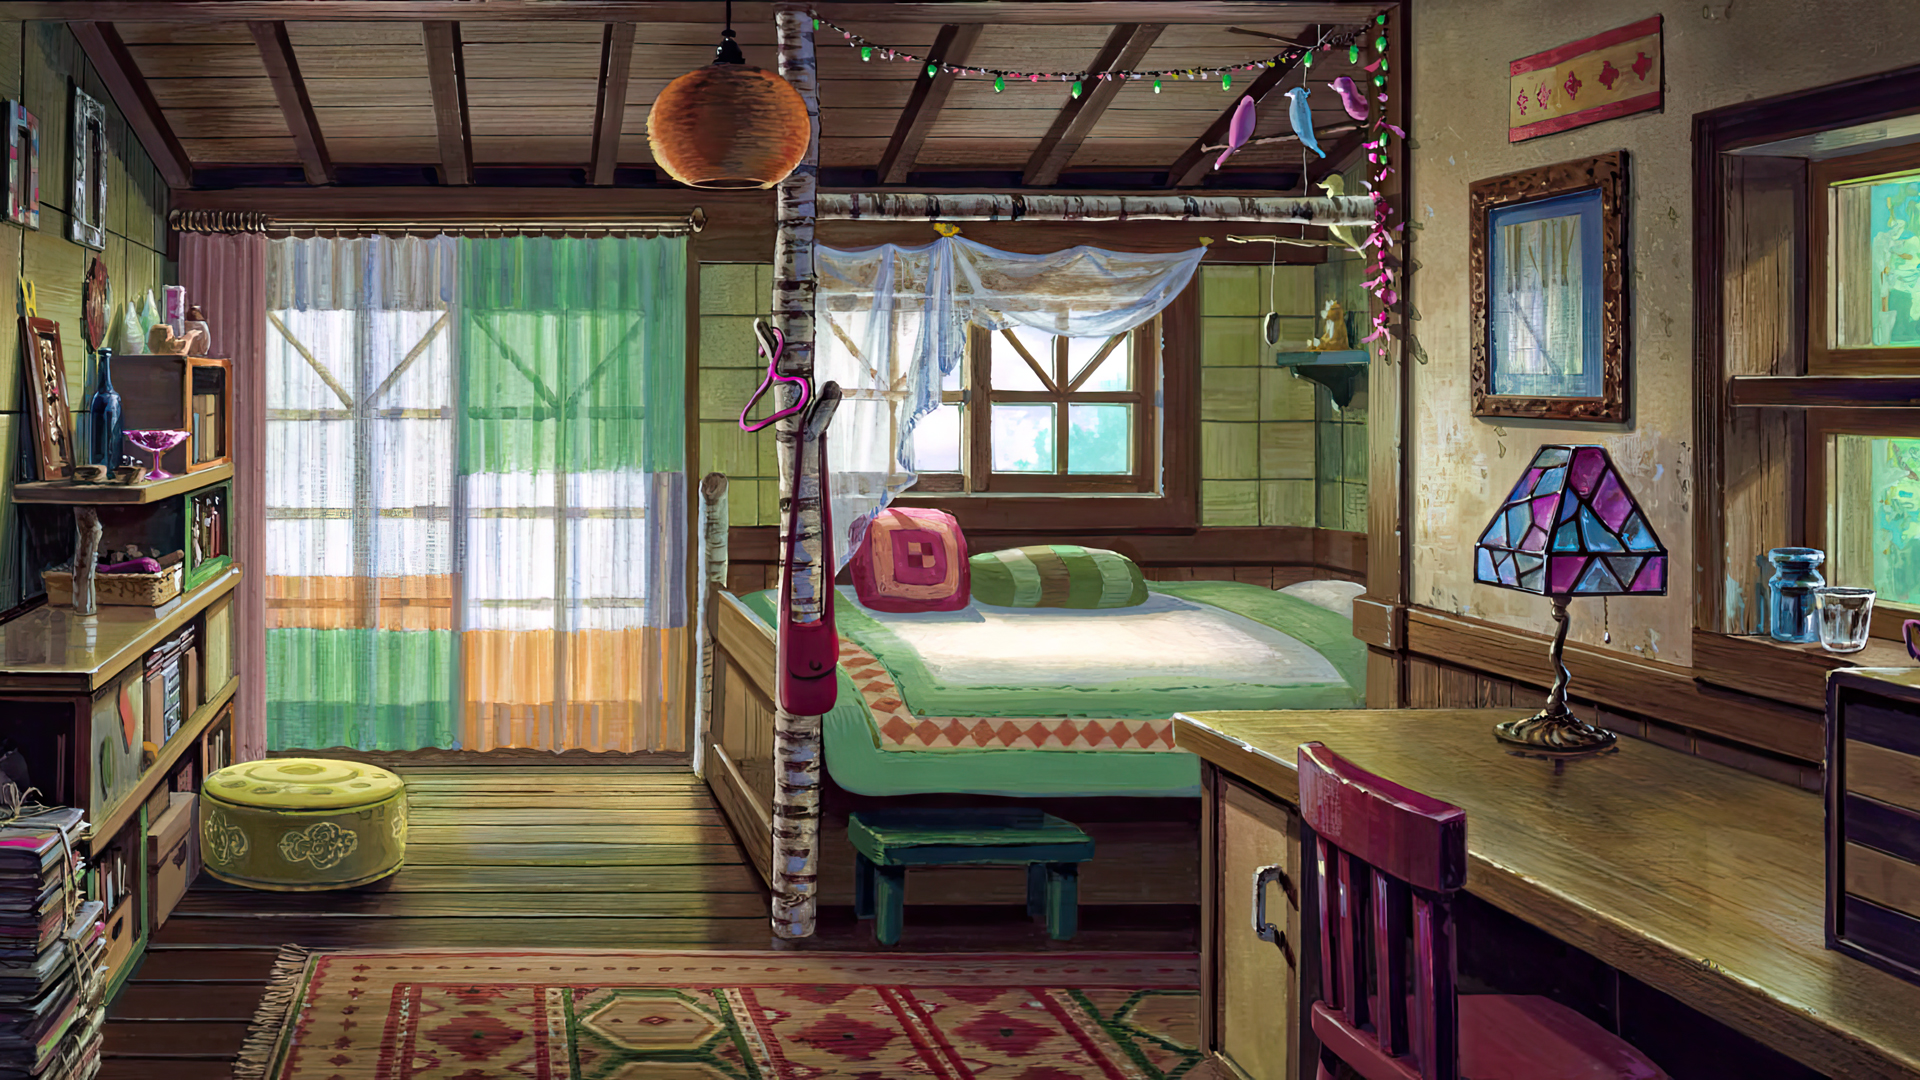 Anime 1920x1080 When Marnie Was There Studio Ghibli animated movies film stills interior anime table bed curtains carpet window pillow lamp shelves hanger ceiling bedroom